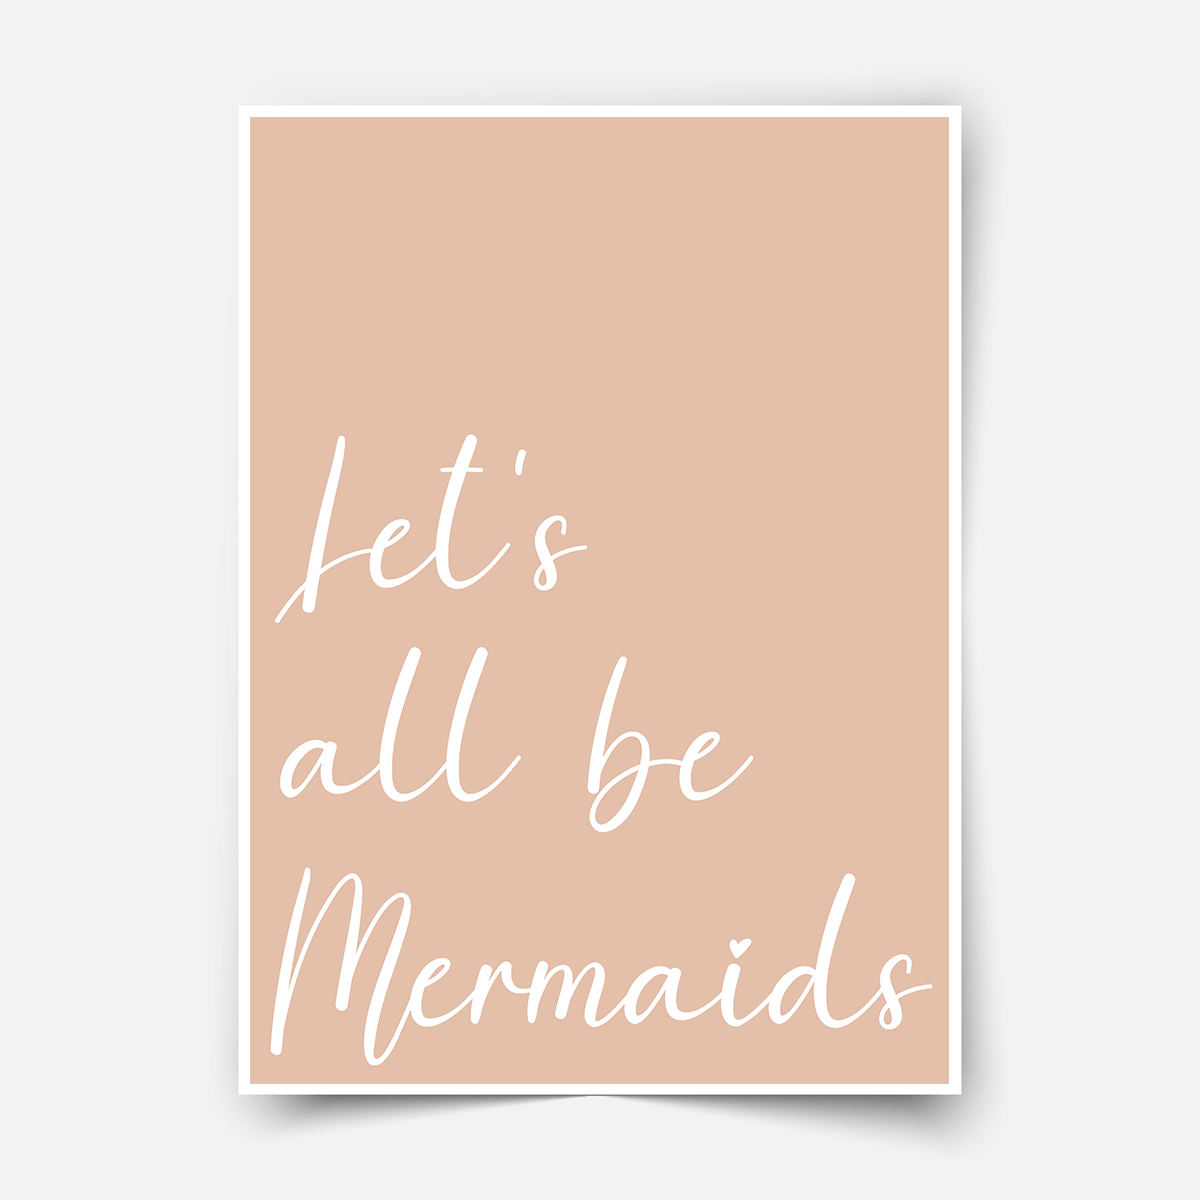 Let's all be mermaids (rosa) - Poster